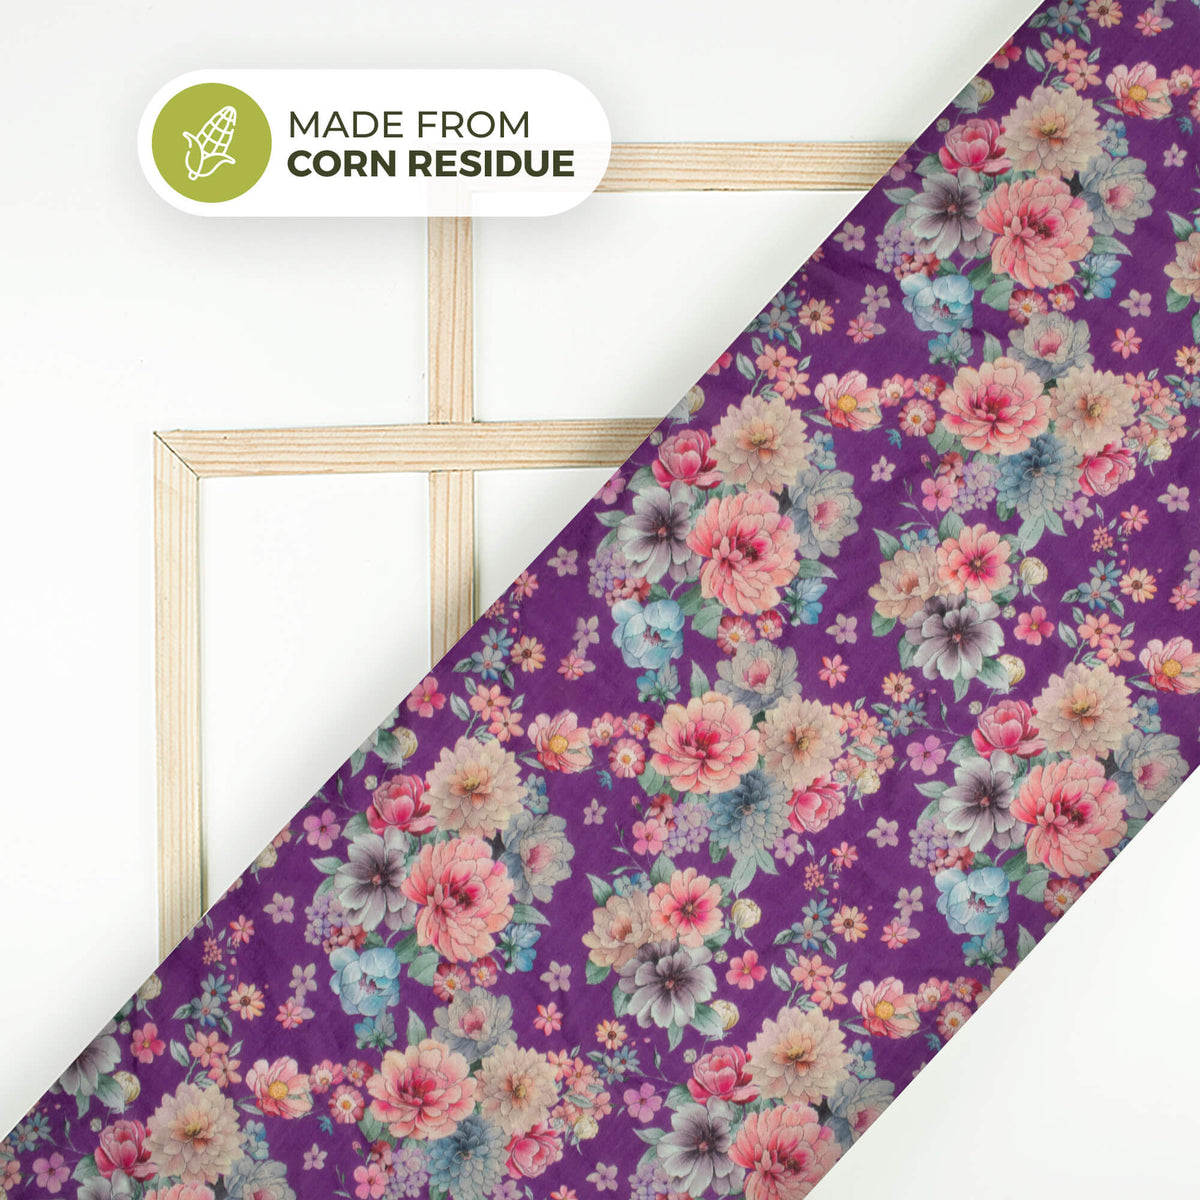 Bestselling Floral Printed Sustainable Corn Fabric